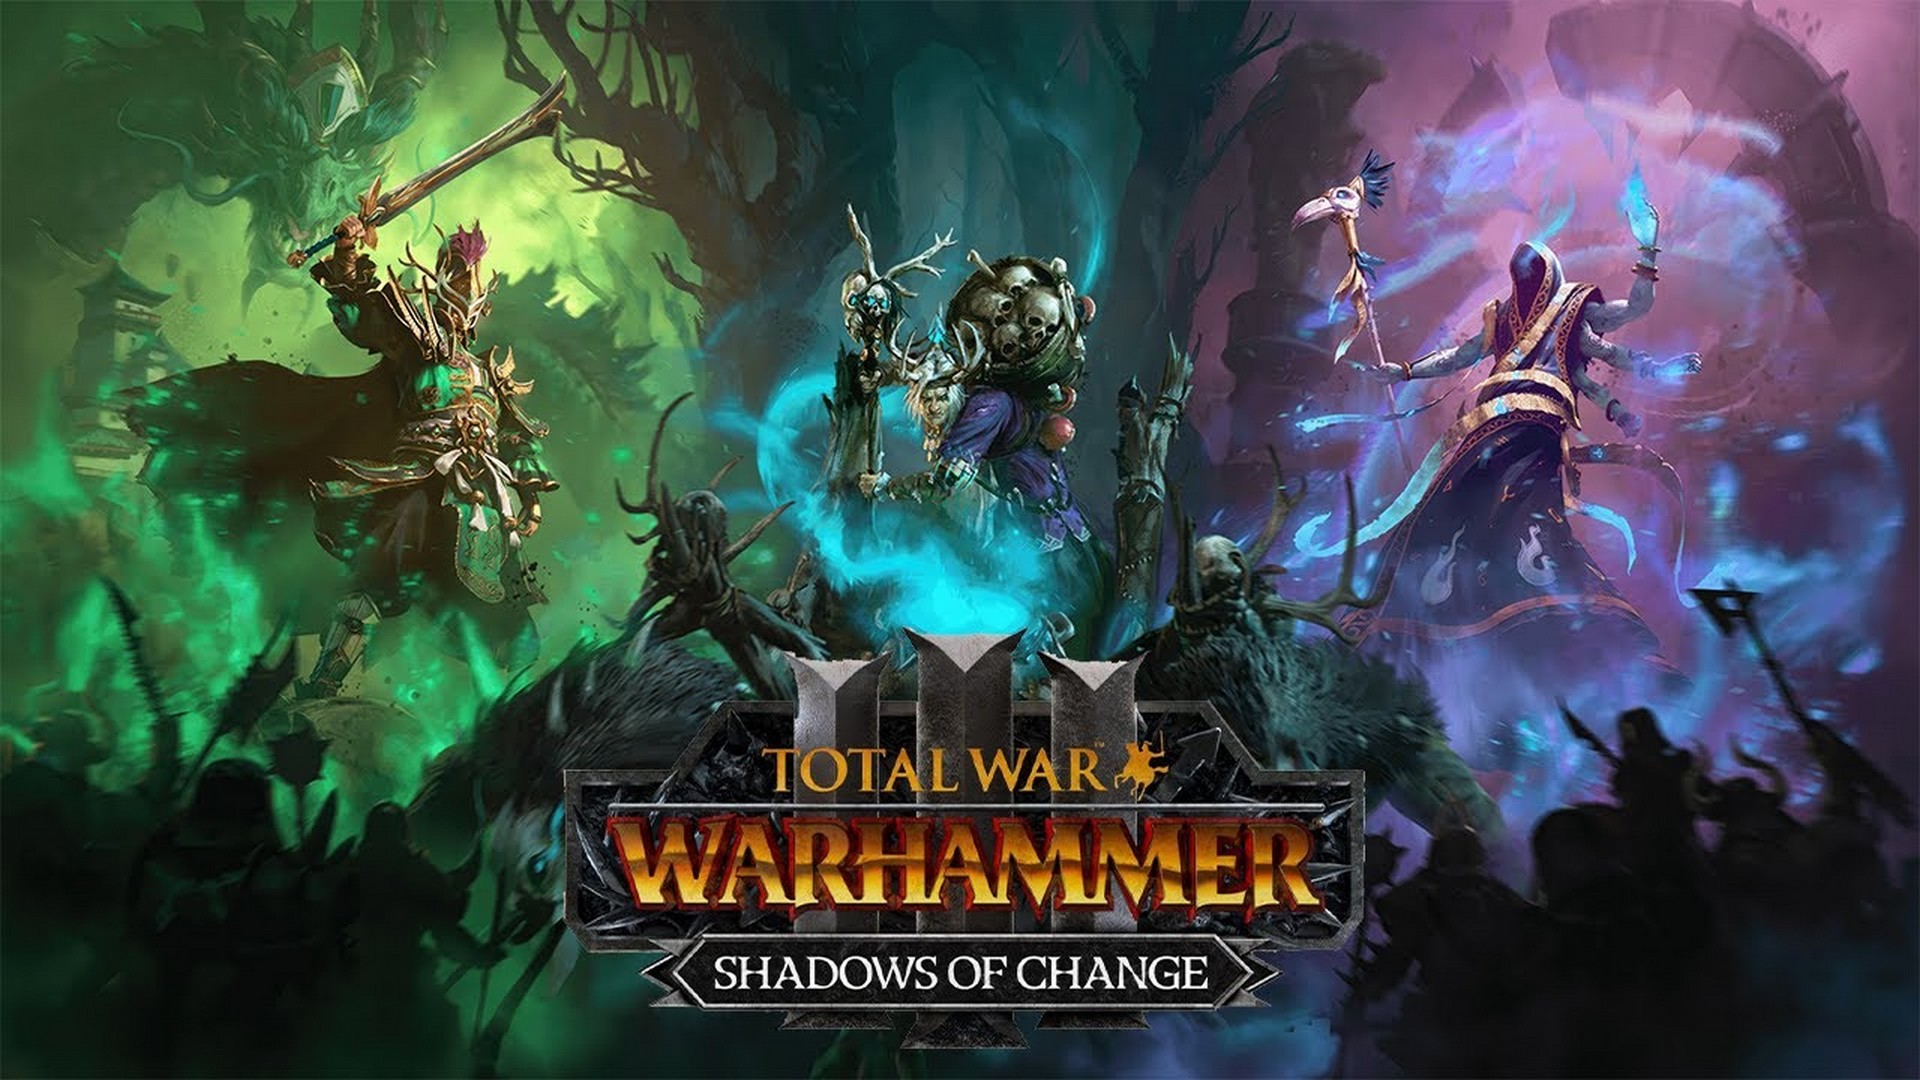 Shadows Of Change Is Out Now For Total War: Warhammer III